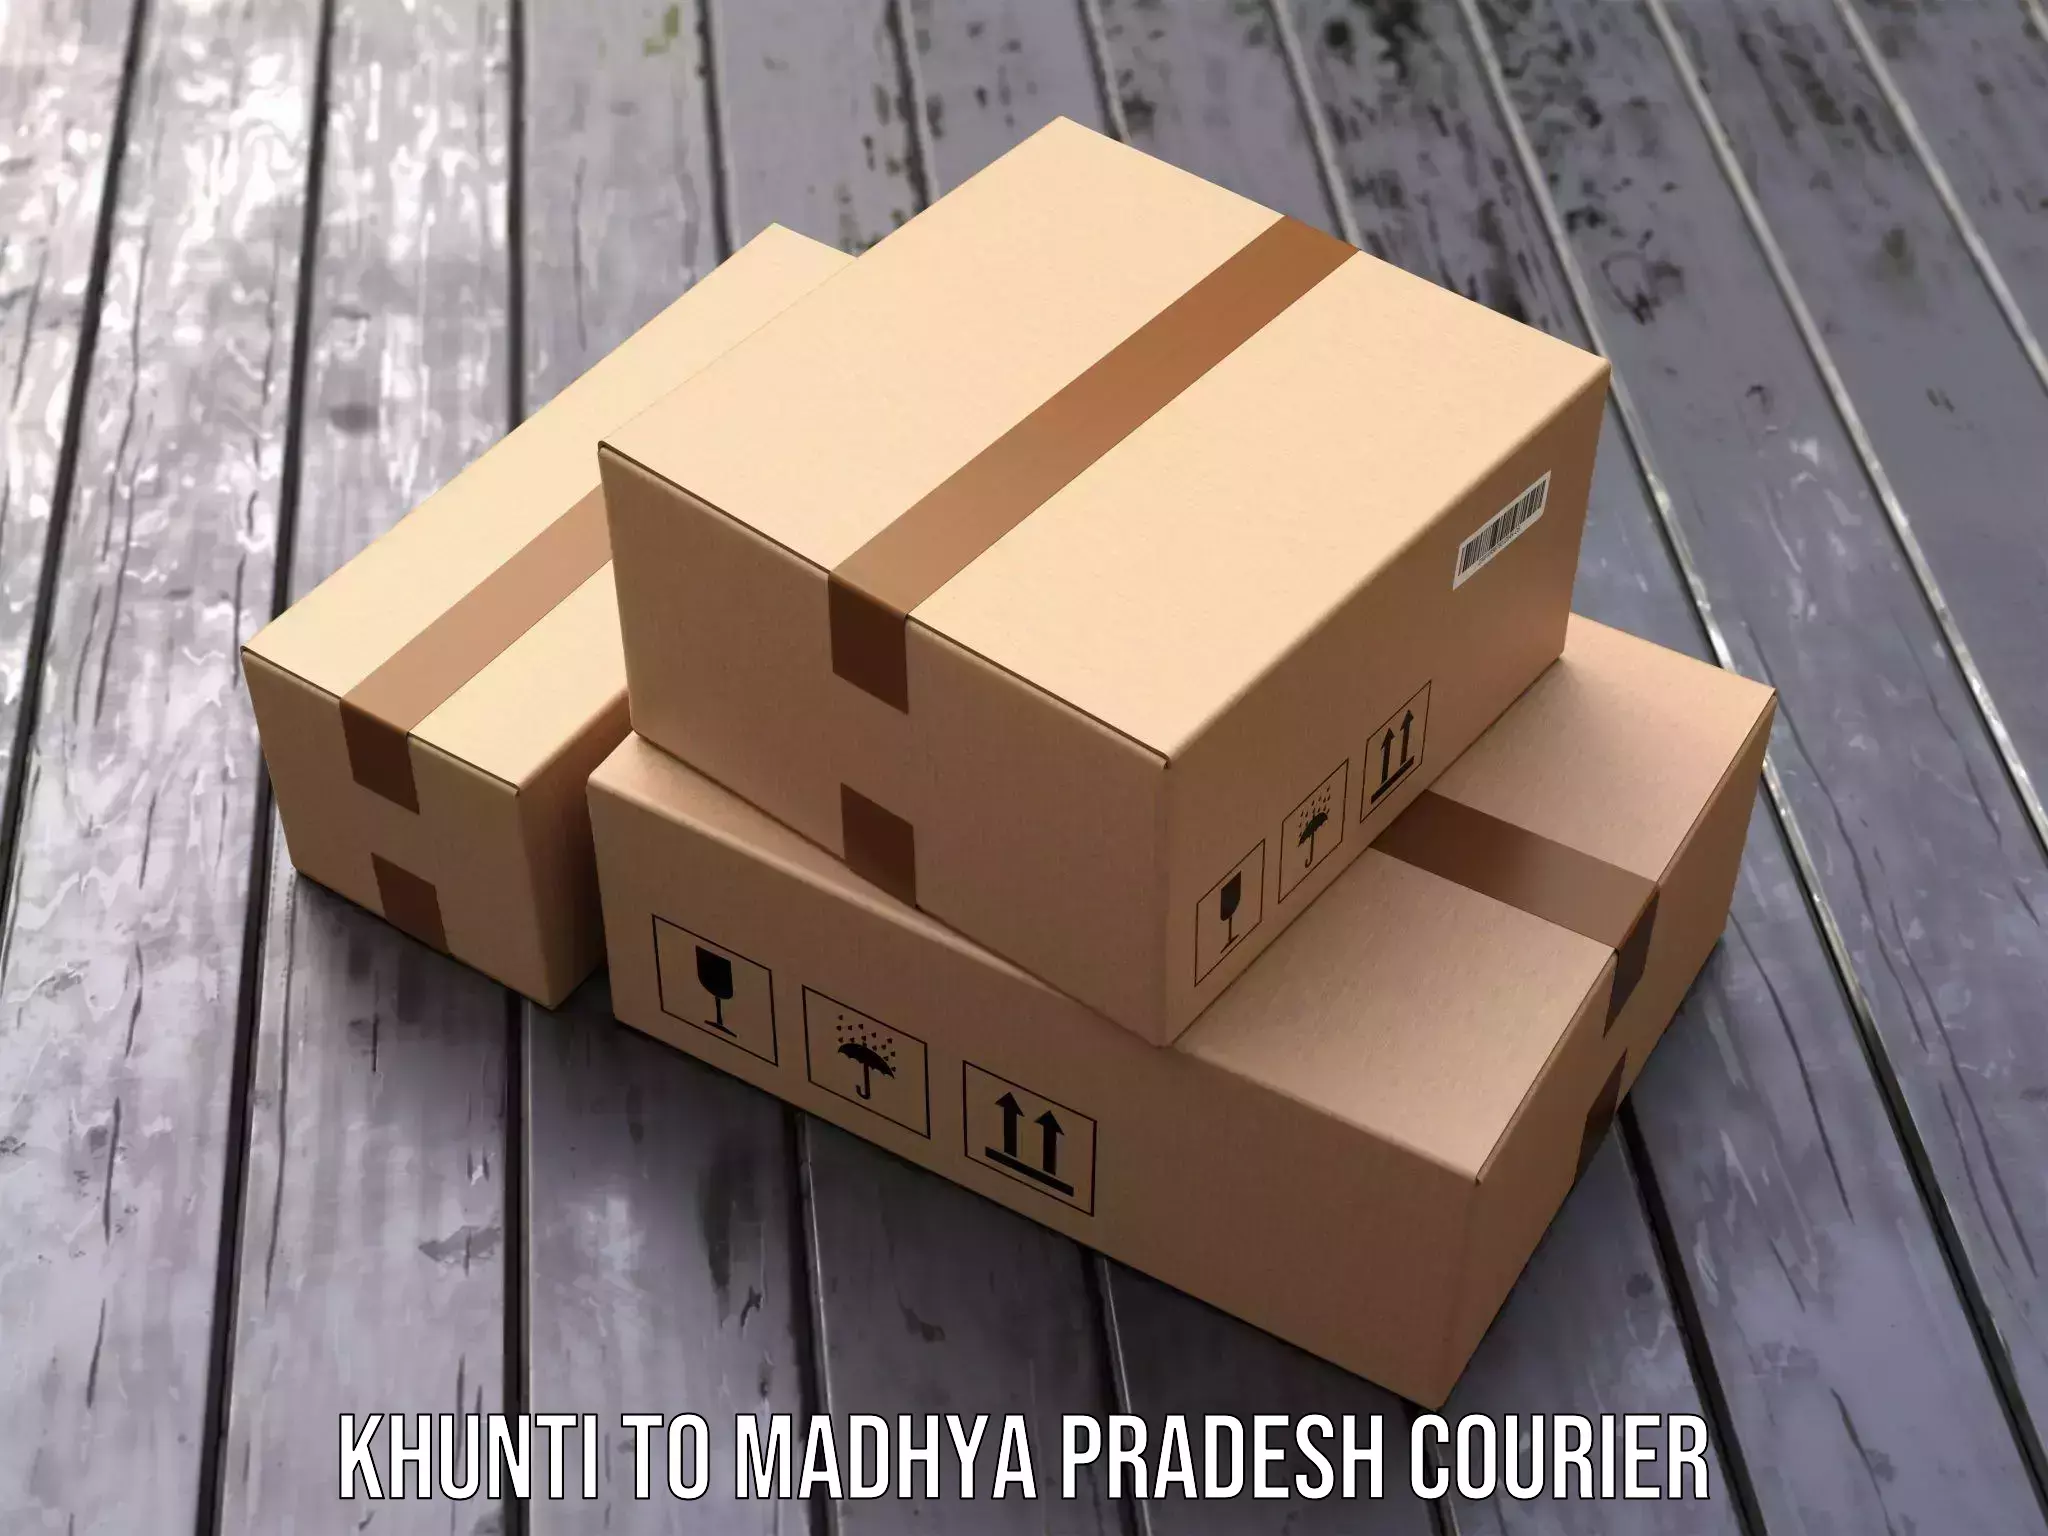 High-capacity parcel service Khunti to Dhamnod